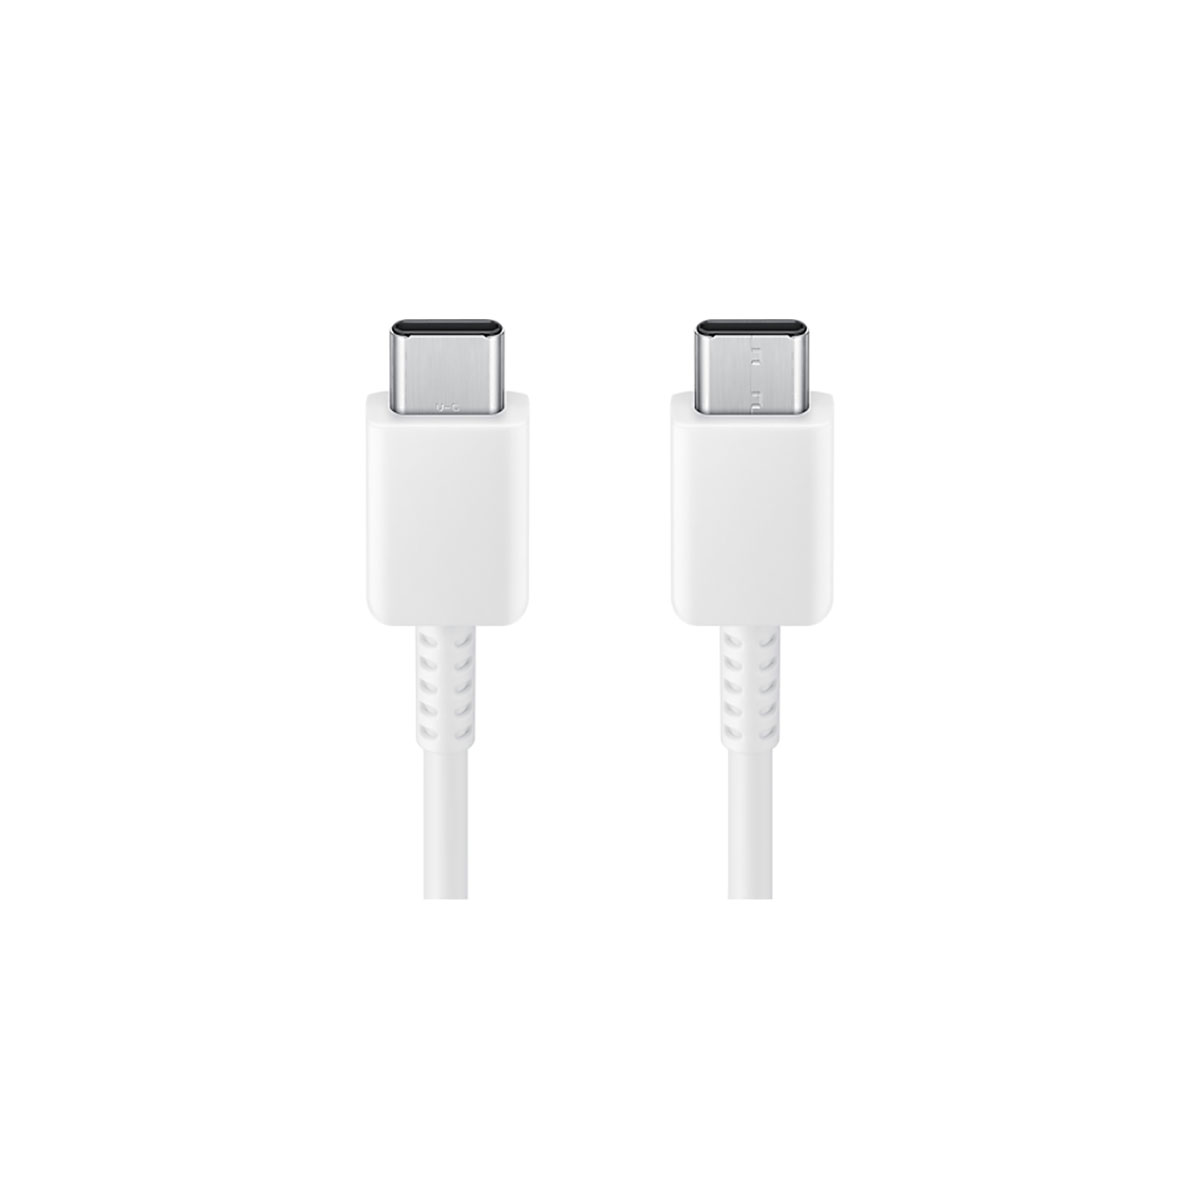 Samsung - 1.8m 3A Cable - White, Supports up to 3A charging output